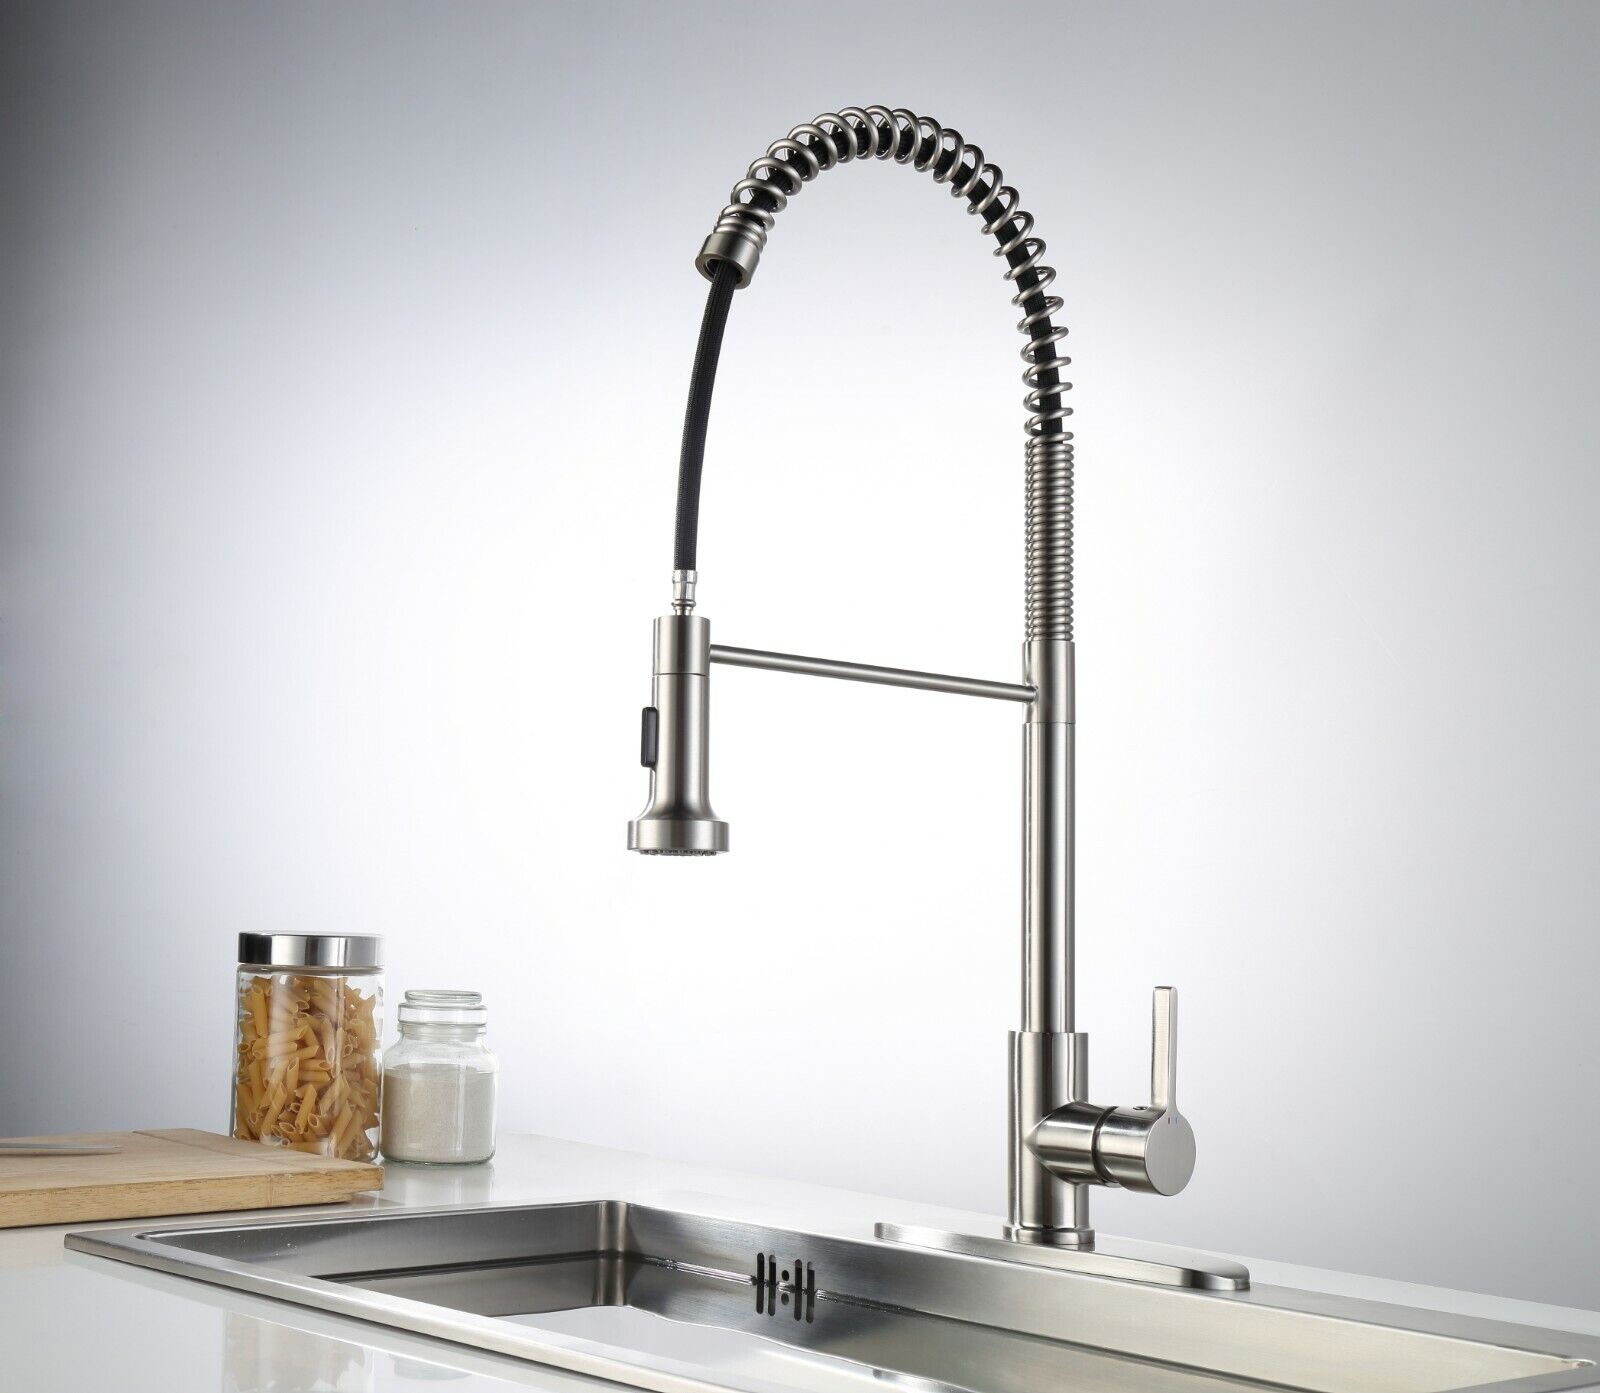 Kingmore KF-1180 Maestoso™ Industrial Spring Spout Pull Down Kitchen Faucet